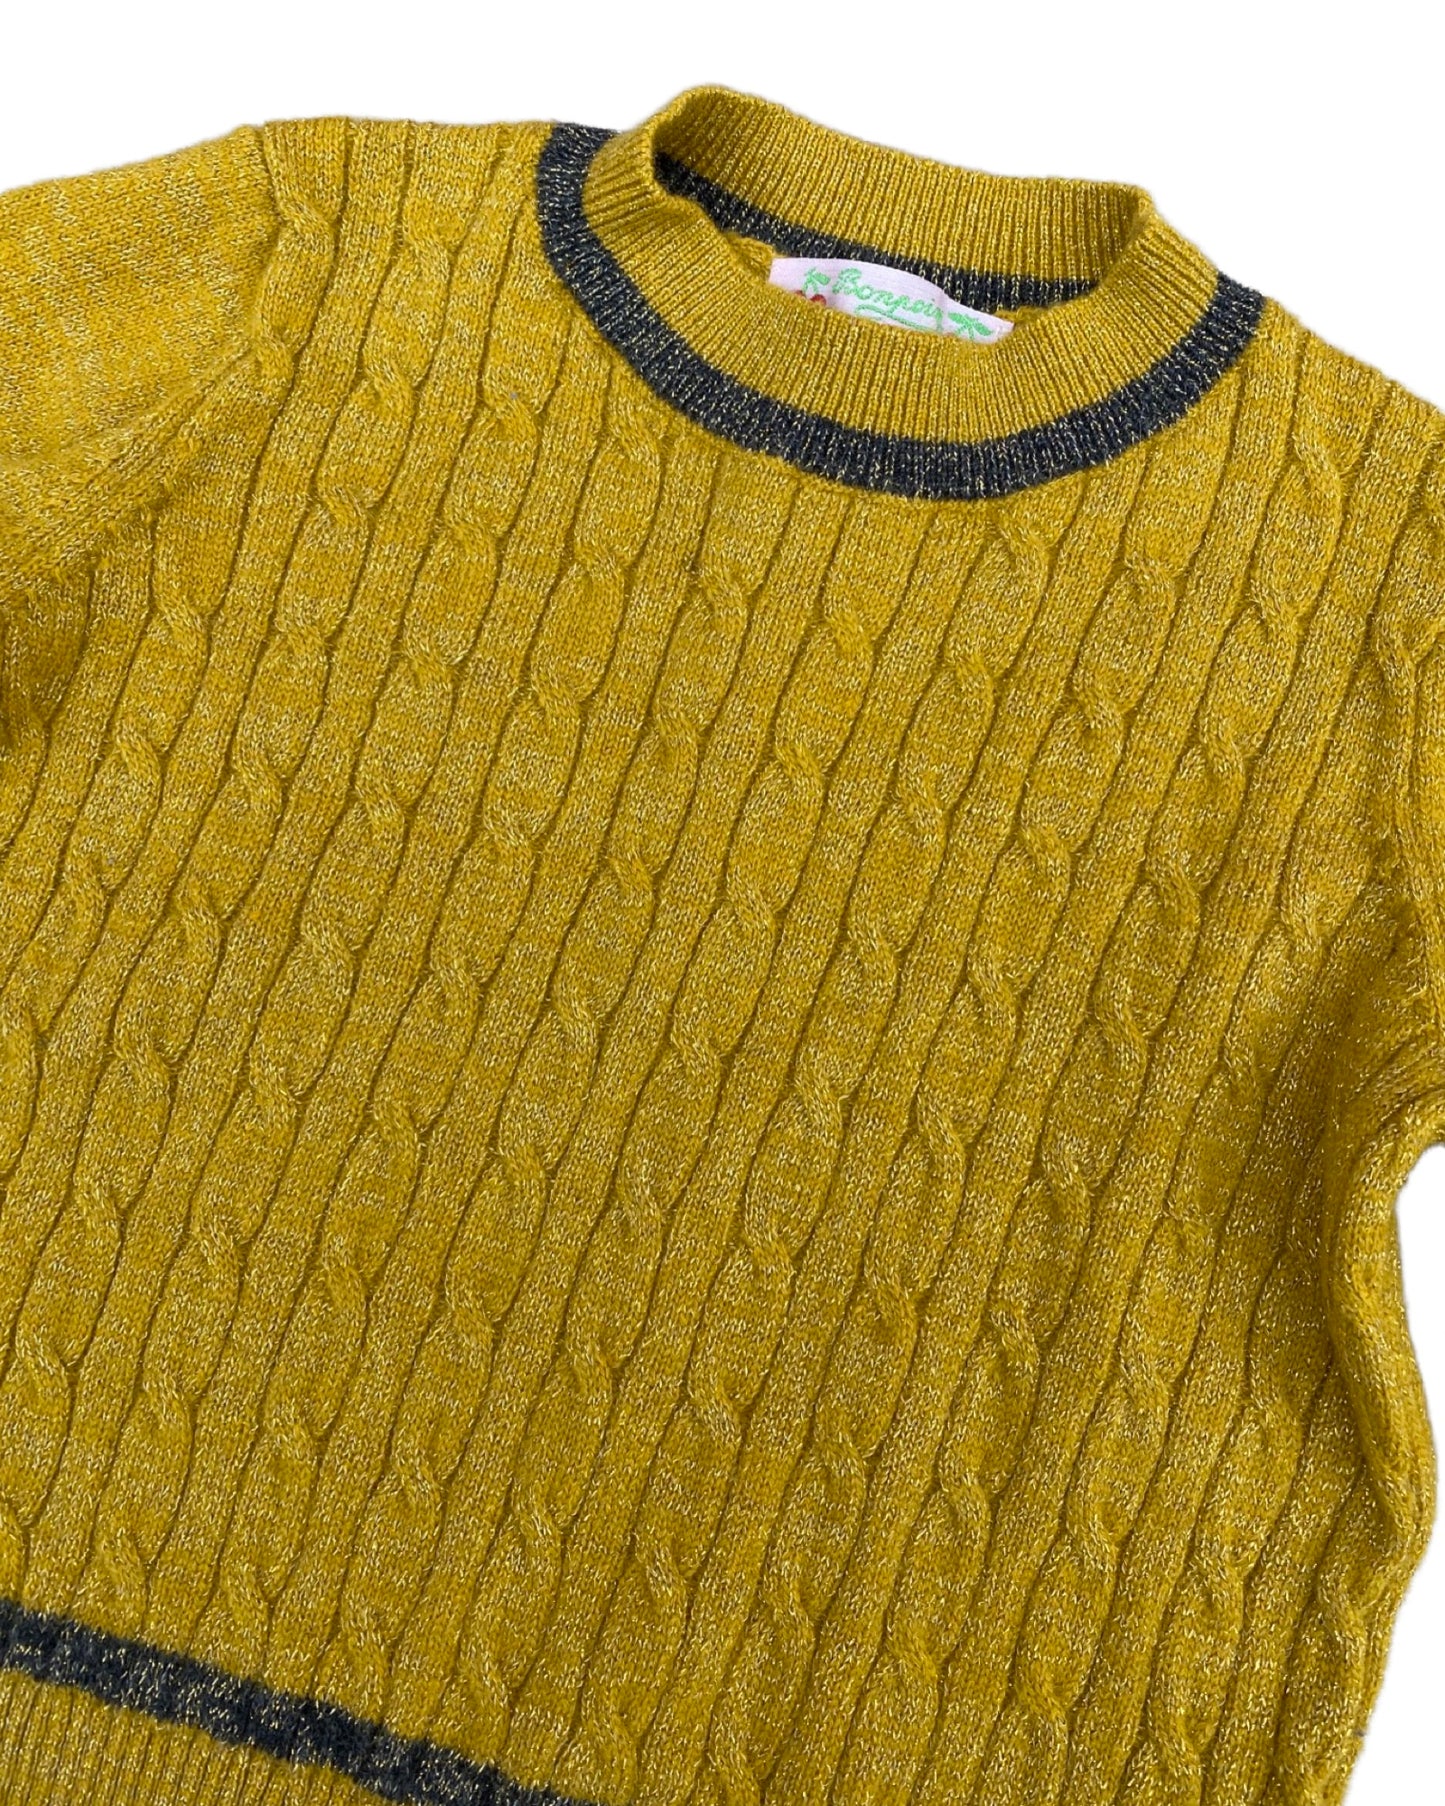 Bonpoint mustard yellow lurex cable knit jumper (3-4years)